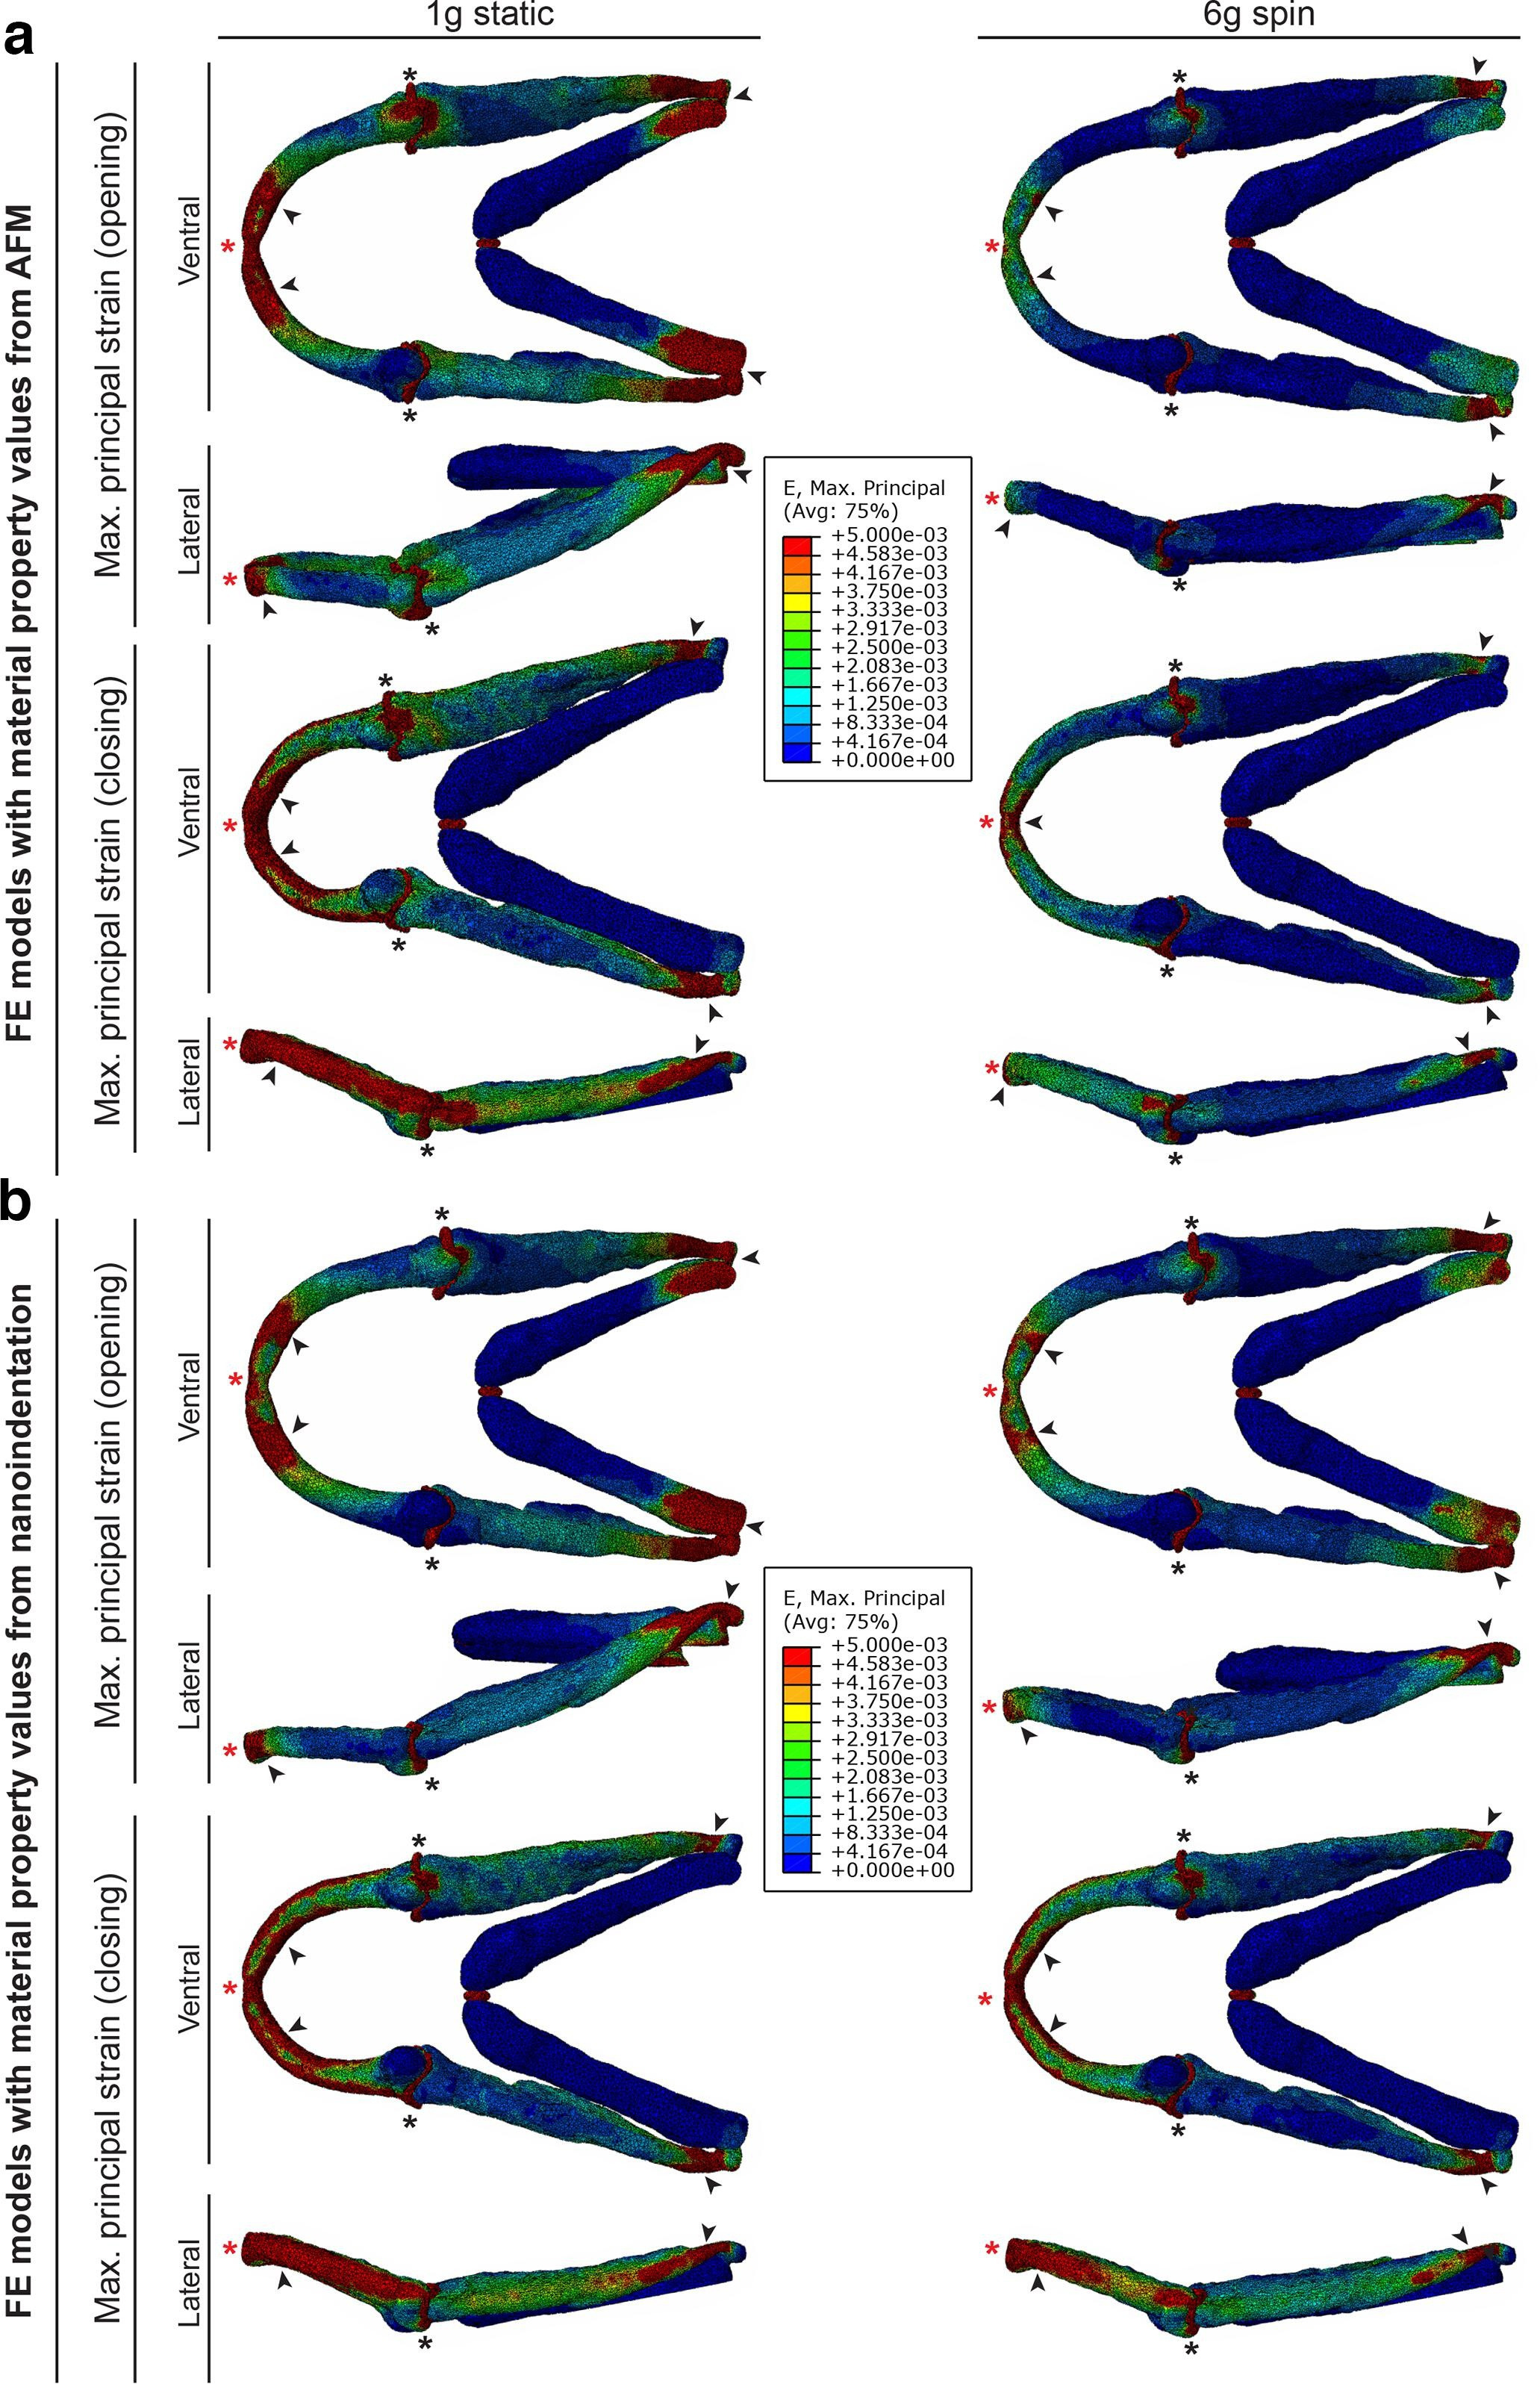 Fig. 3 
            Altered extracellular matrix (ECM) characteristics could result from altered strain distribution in the lower jaw following hypergravity exposure. a) Finite element (FE) models of maximum principal strain incorporating relative material property values from atomic force microscopy (AFM) in 1 g static and 6 g spin zebrafish. b) FE models of maximum principal strain incorporating relative material property values from nanoindentation in 1 g static and 6 g spin zebrafish. Black arrowheads = areas of high strain; black asterisks = jaw joints; red asterisks = Meckel’s symphysis. Ventral and lateral views shown for opening and closing steps in both gravity conditions.
          